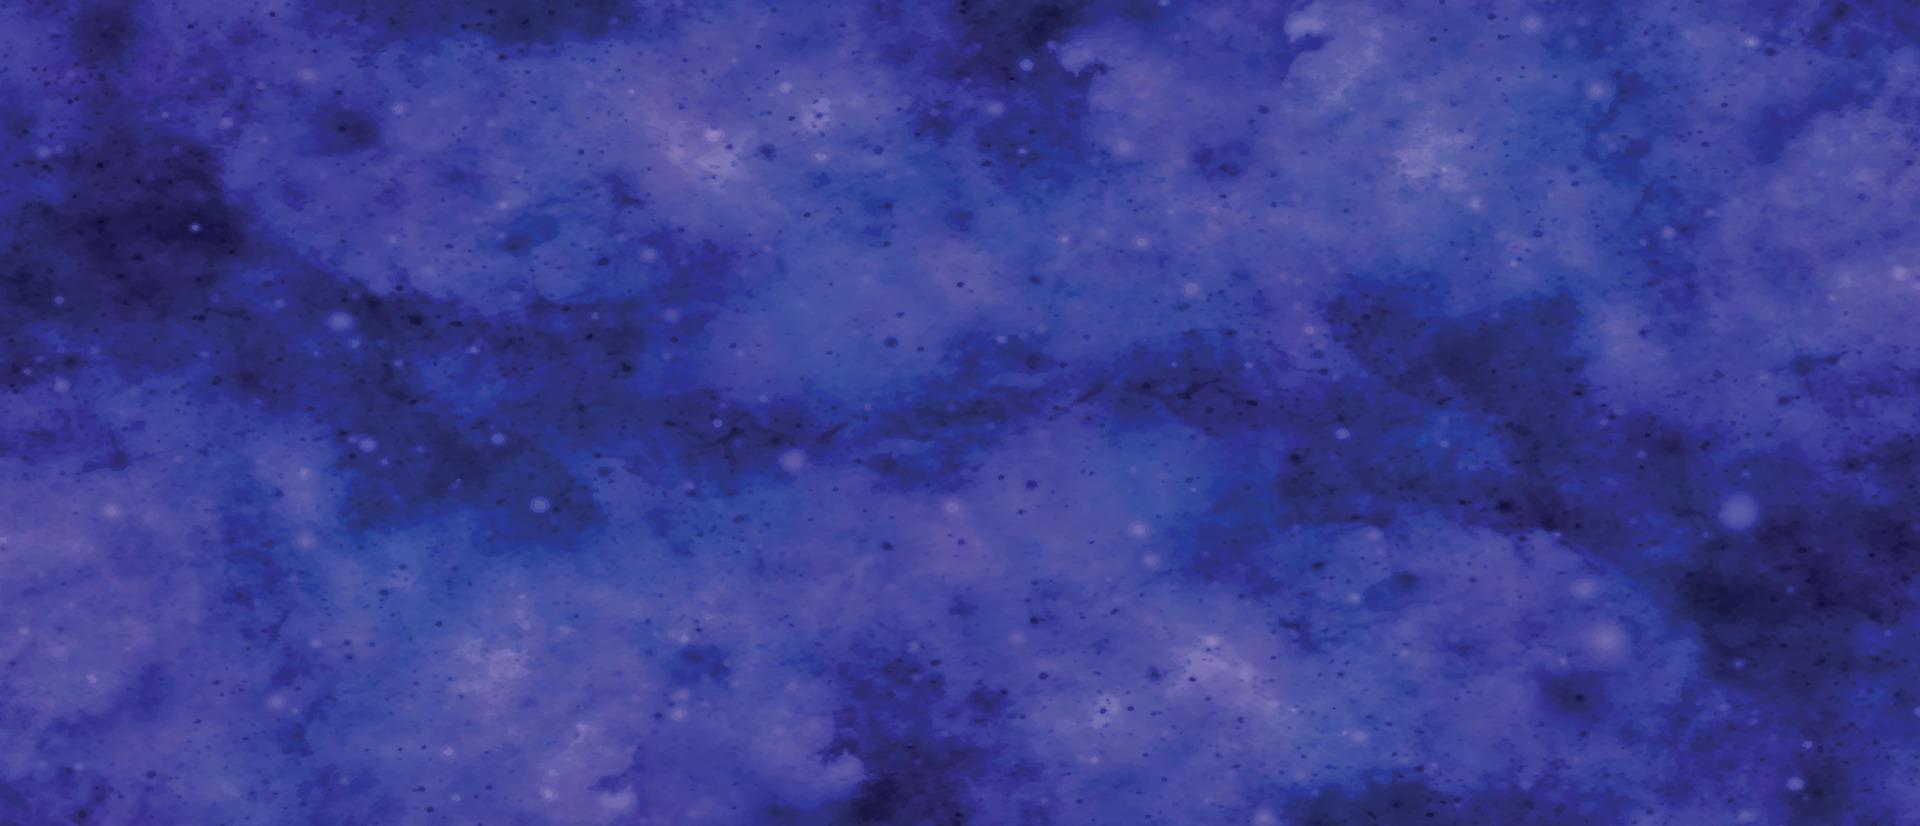 Artistic hand painted multi layered dark blue background. dark blue nebula sparkle purple star universe in outer space horizontal galaxy on space. navy blue watercolor and paper texture. wash aqua vector